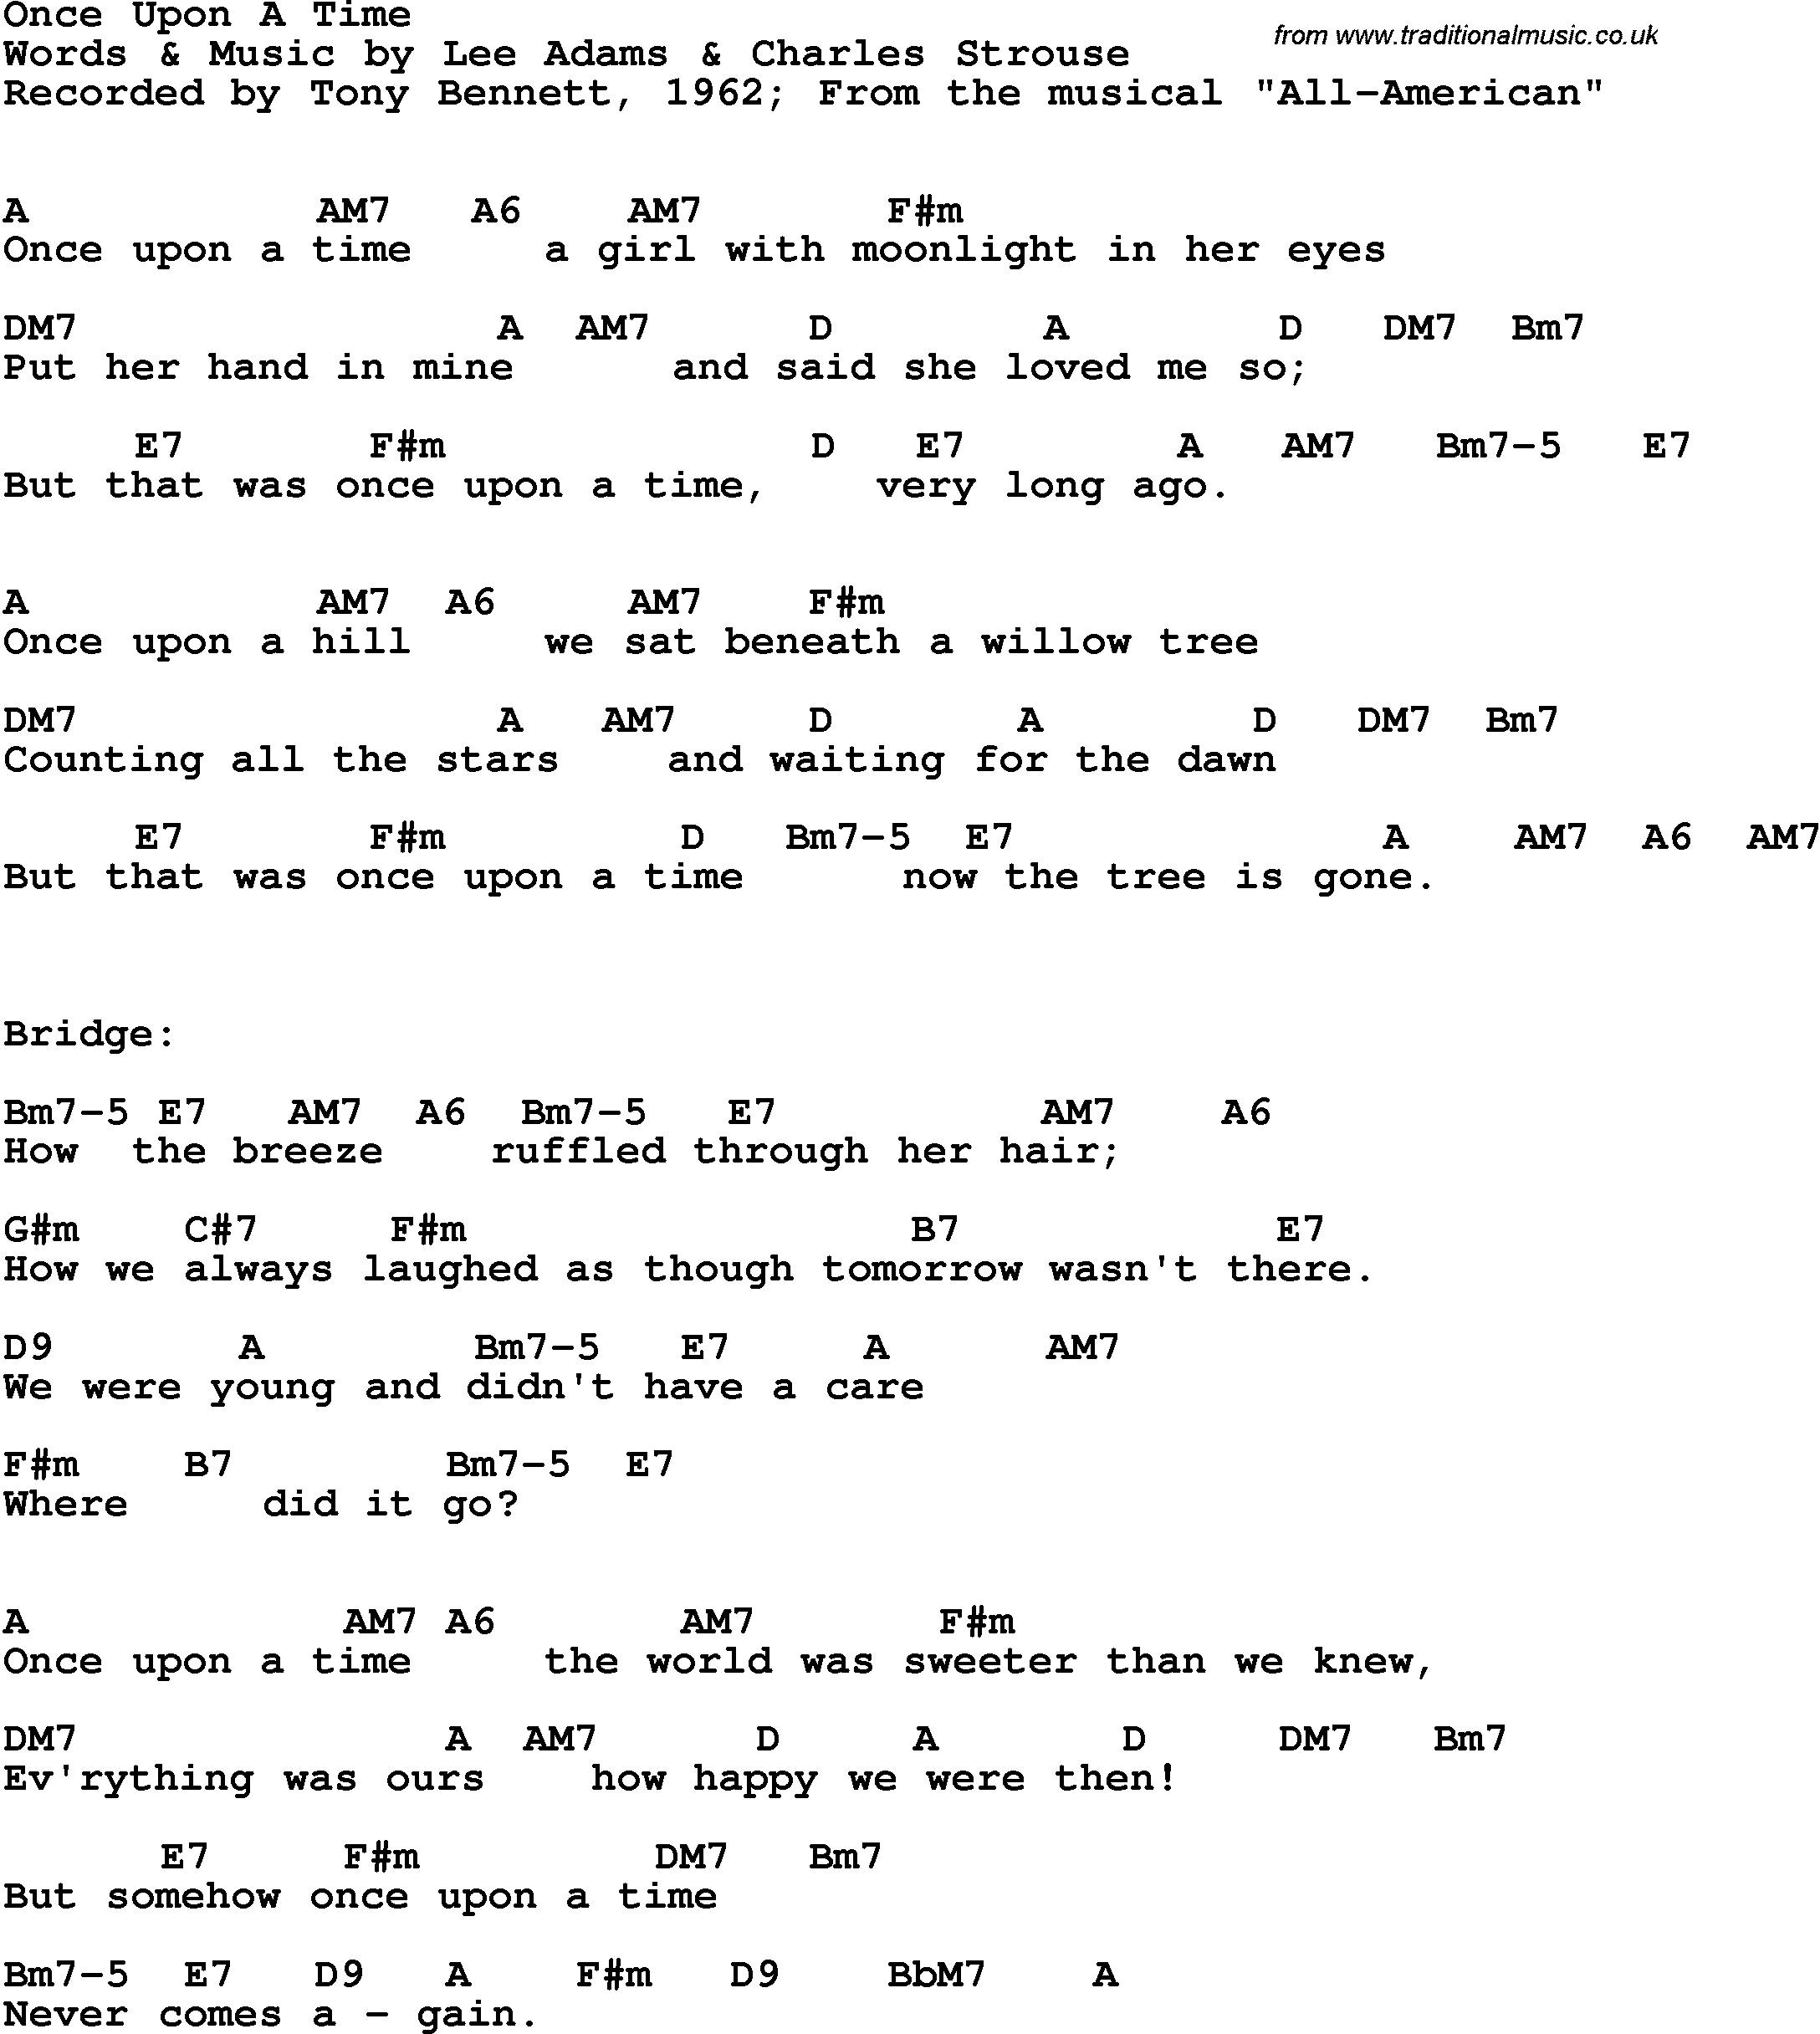 Song Lyrics with guitar chords for Once Upon A Time - Tony Bennett, 1962